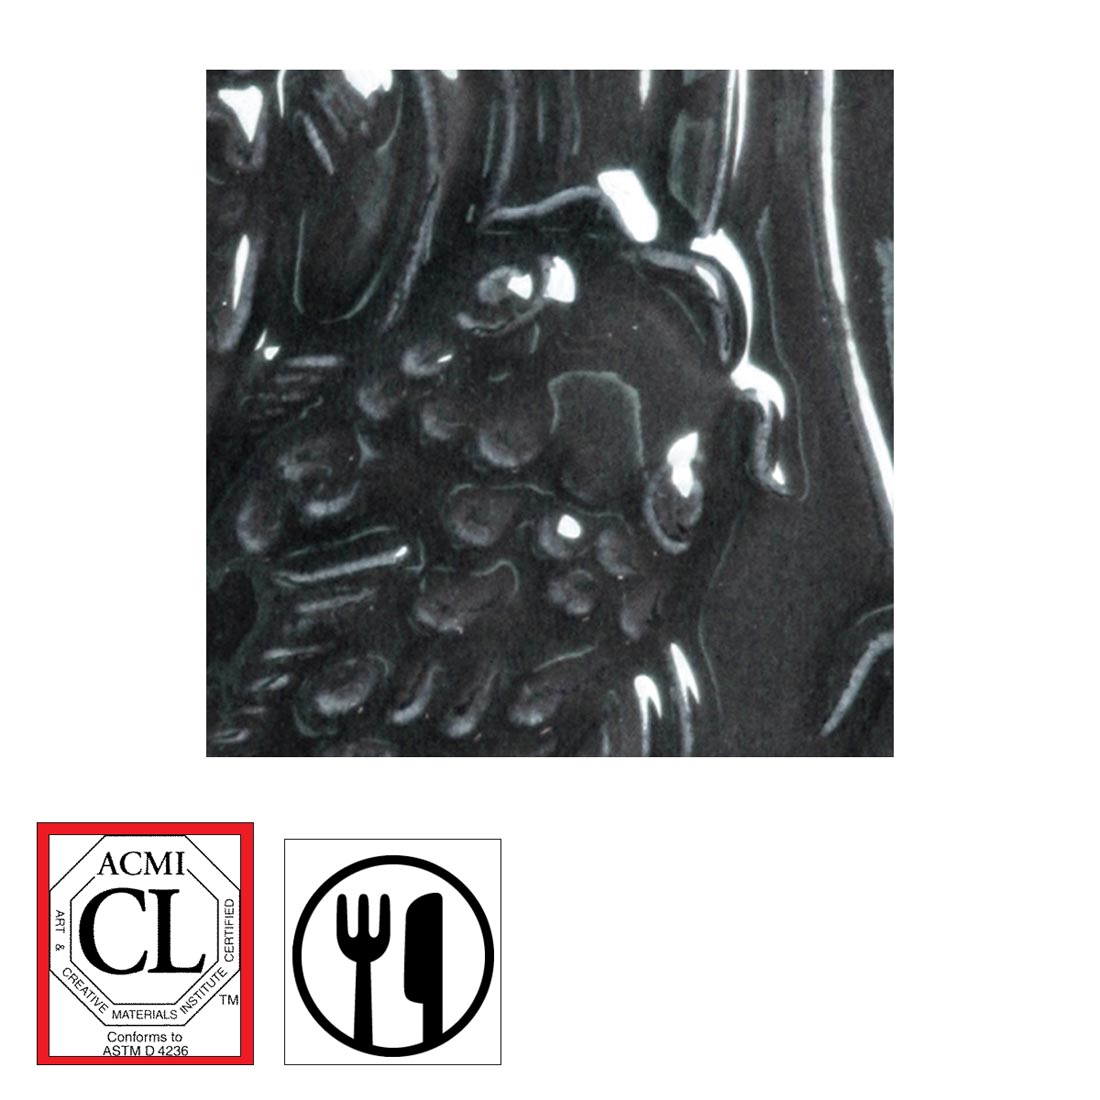 clay tile with Black Lustre AMACO Gloss Glaze applied; symbols for Cautionary Label and food safe